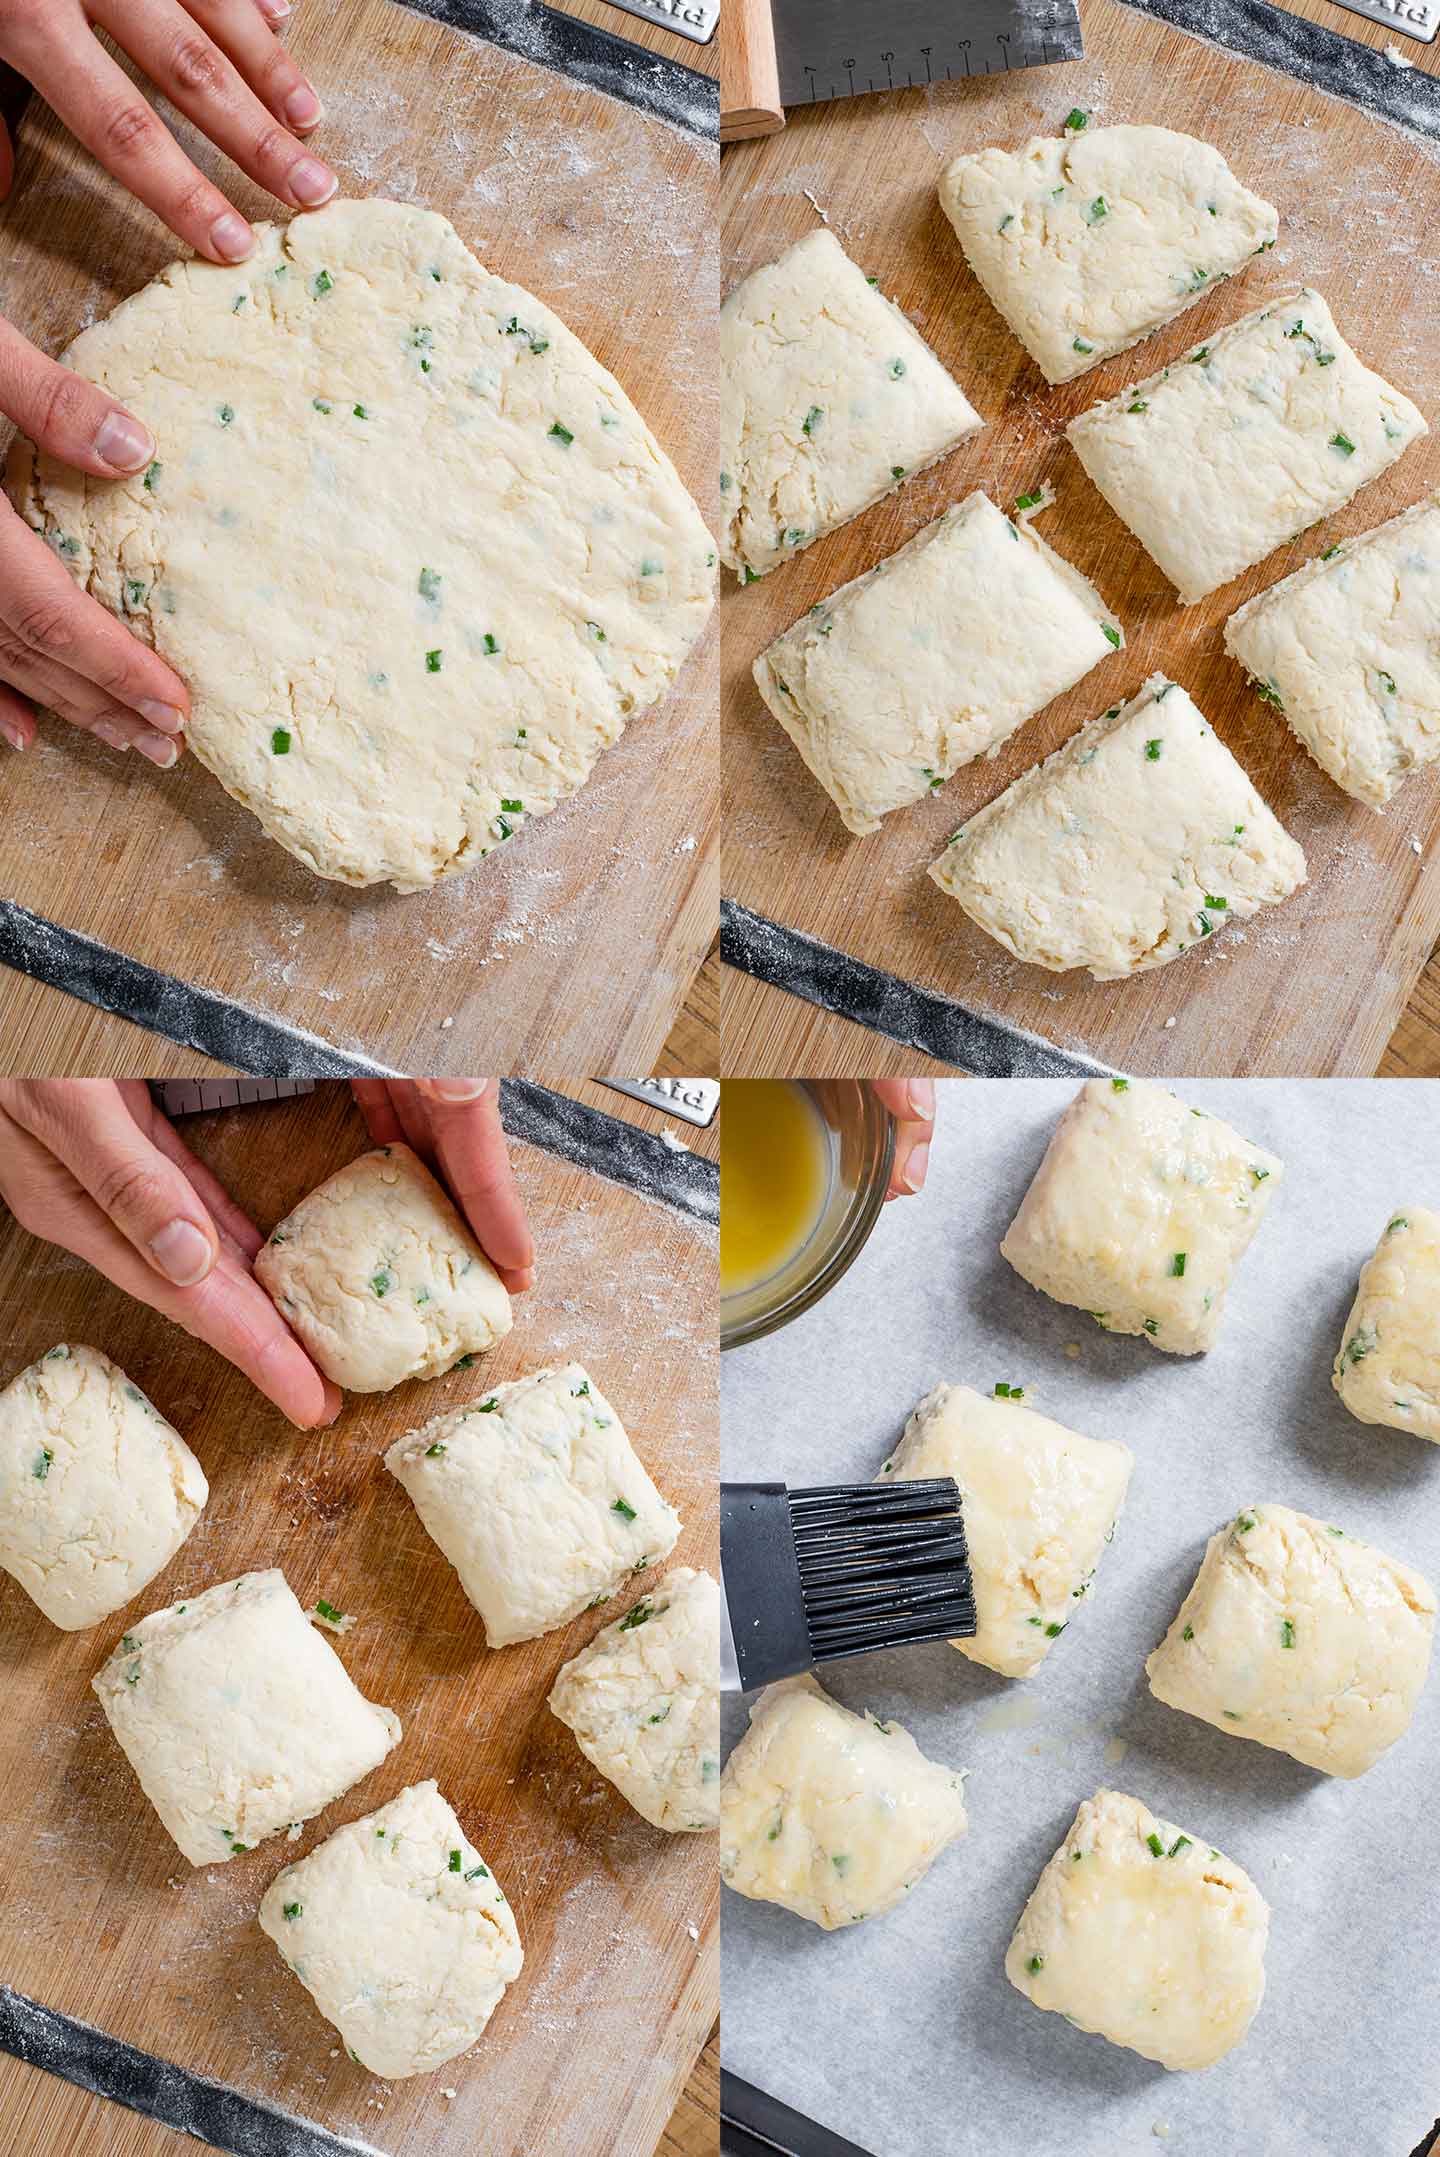 Grid of four process phots. Dough is formed into a rectangle, then sliced into 6 segments. Square biscuits are formed and the tops are brushed with melted butter.